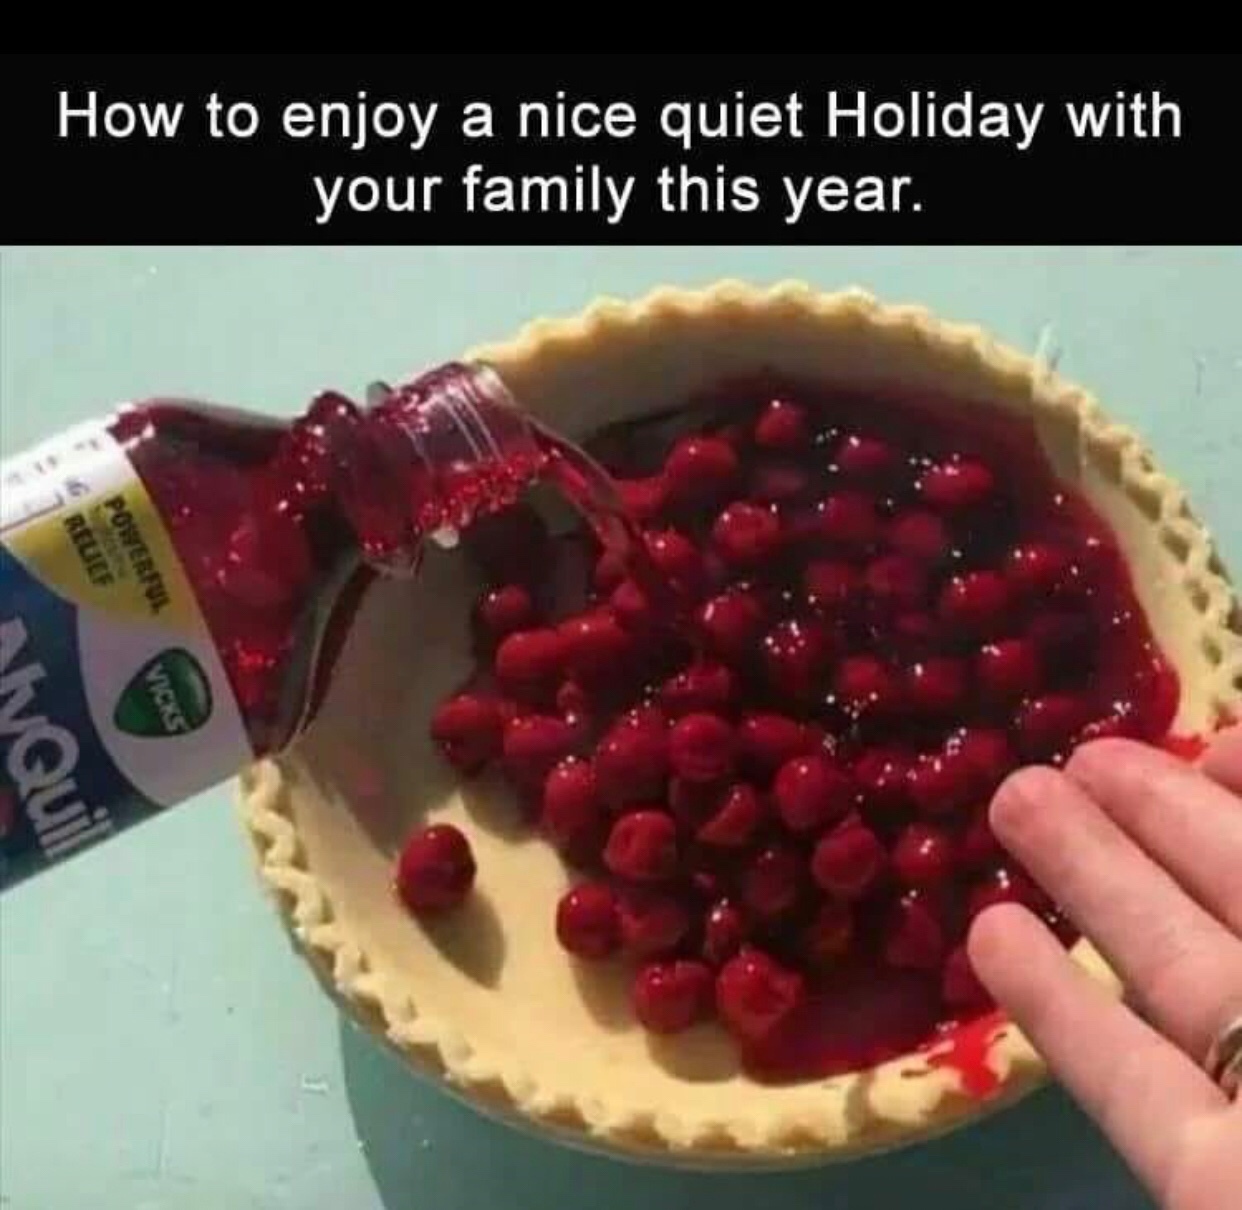 I know what I'm making for Thanksgiving - meme